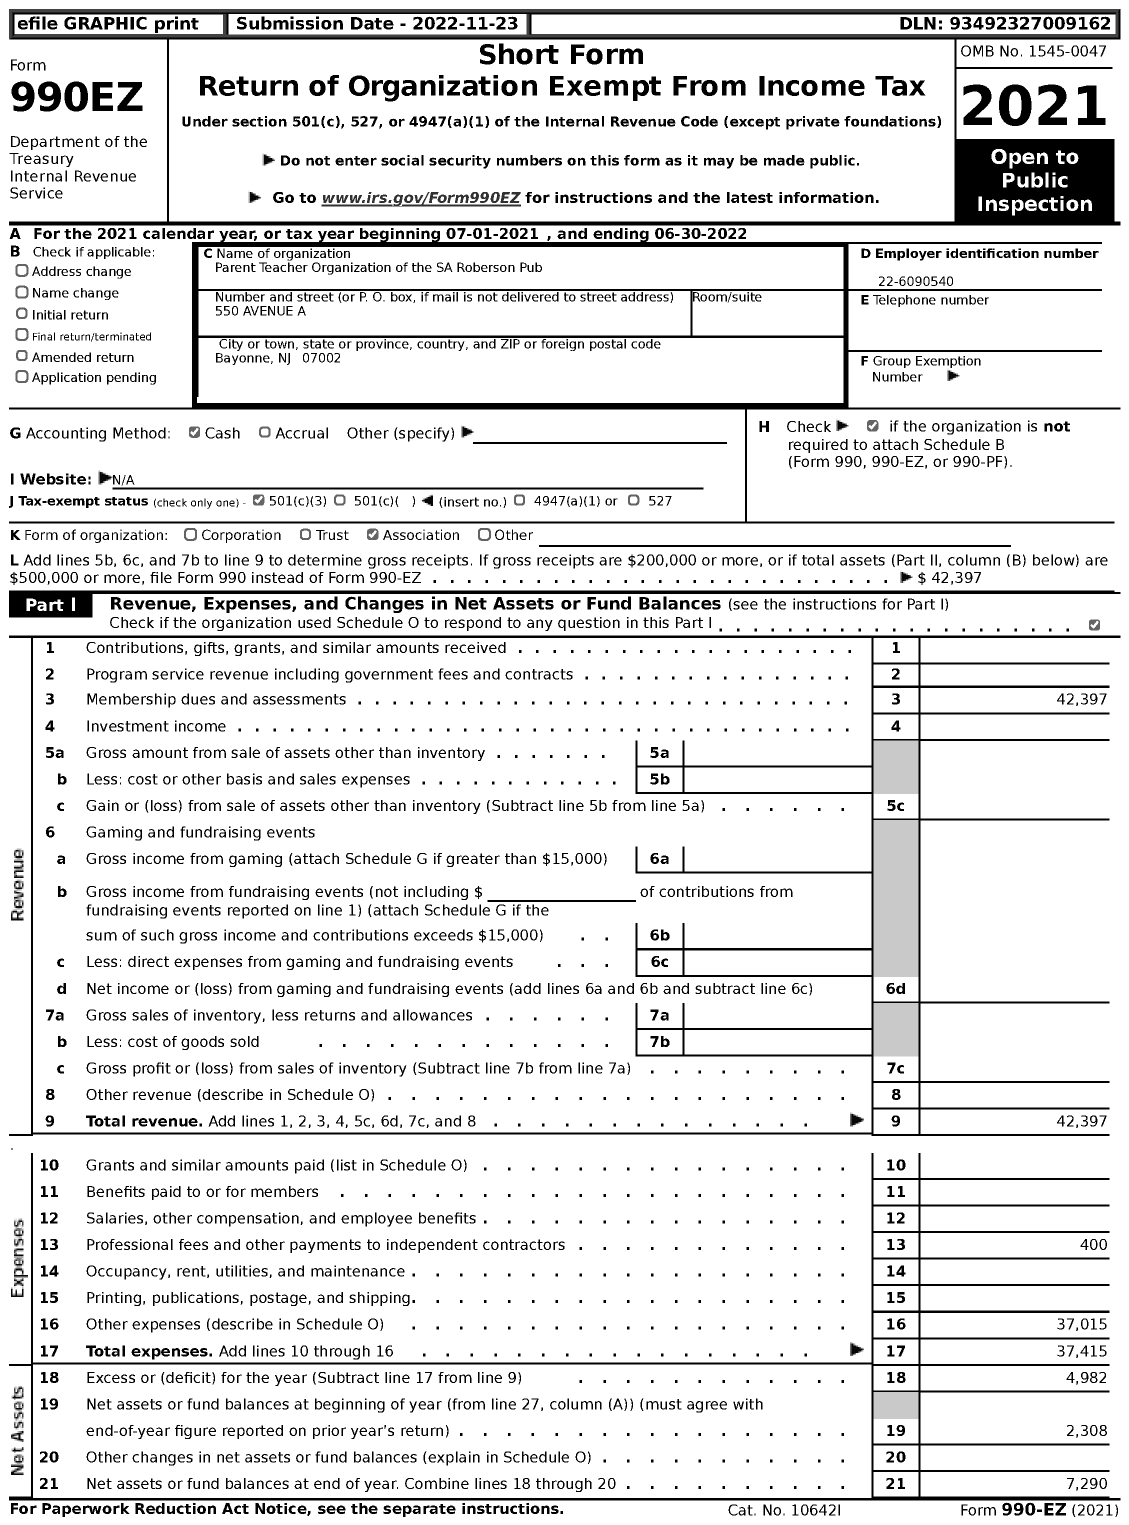 Image of first page of 2021 Form 990EZ for Parent Teacher Organization of the SA Roberson Pub